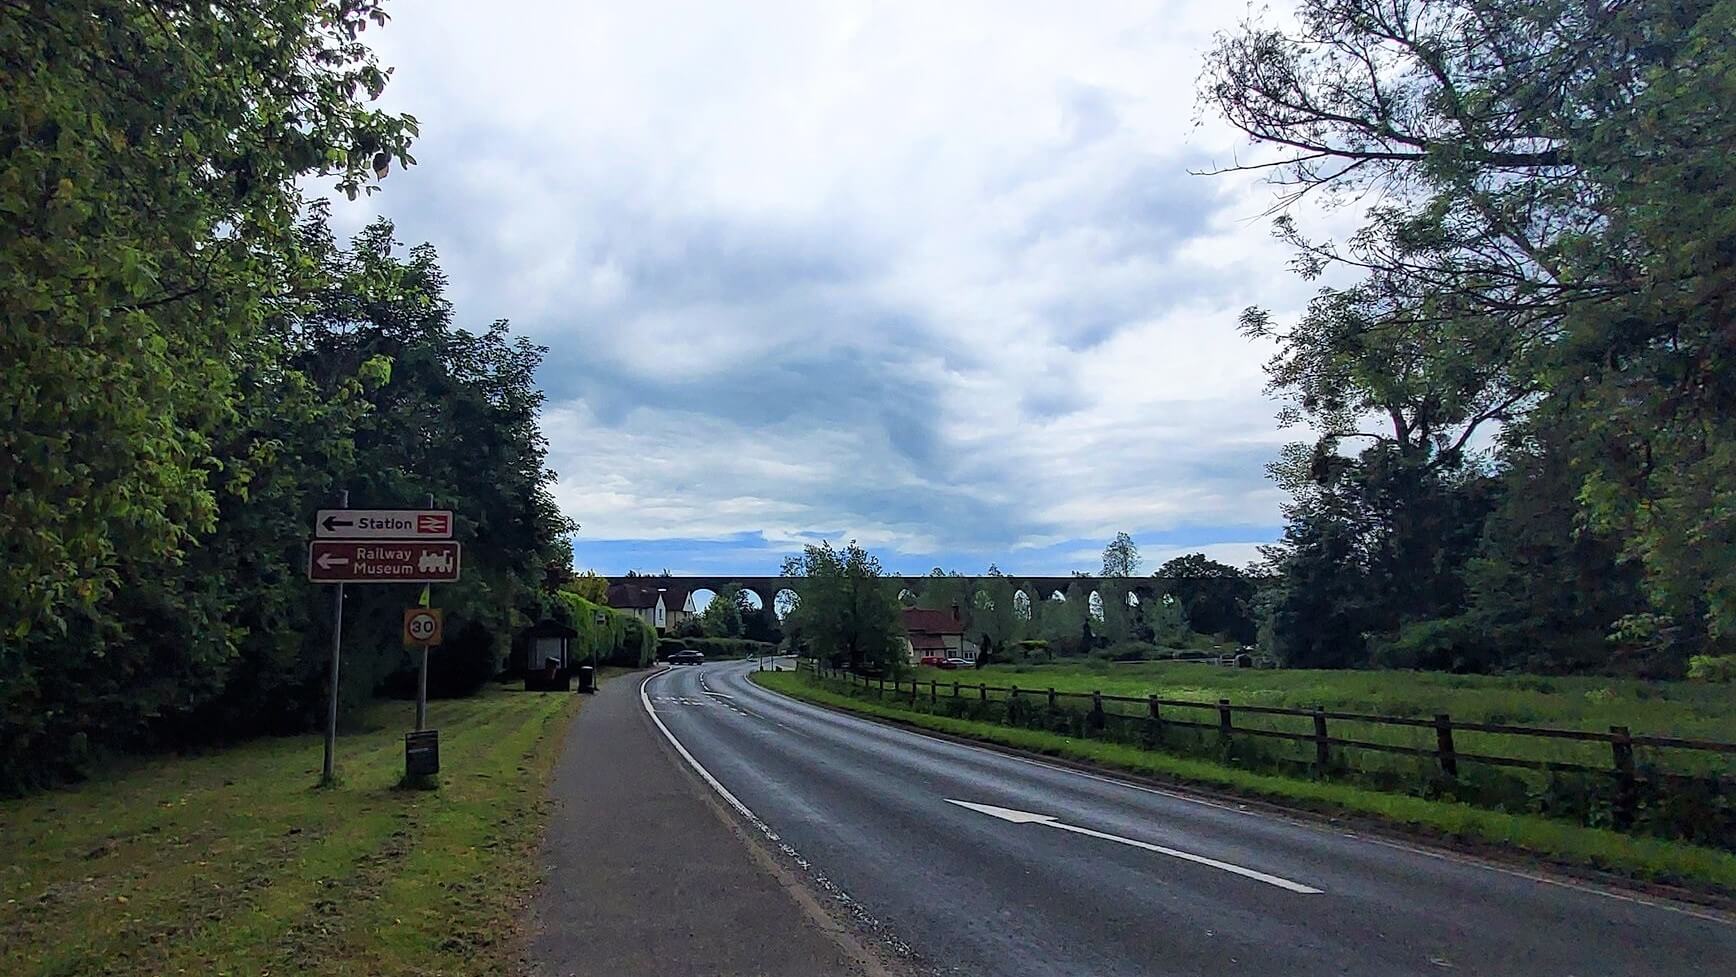 the chappel viaduct viewed from the road which leads to the east anglian railway museum